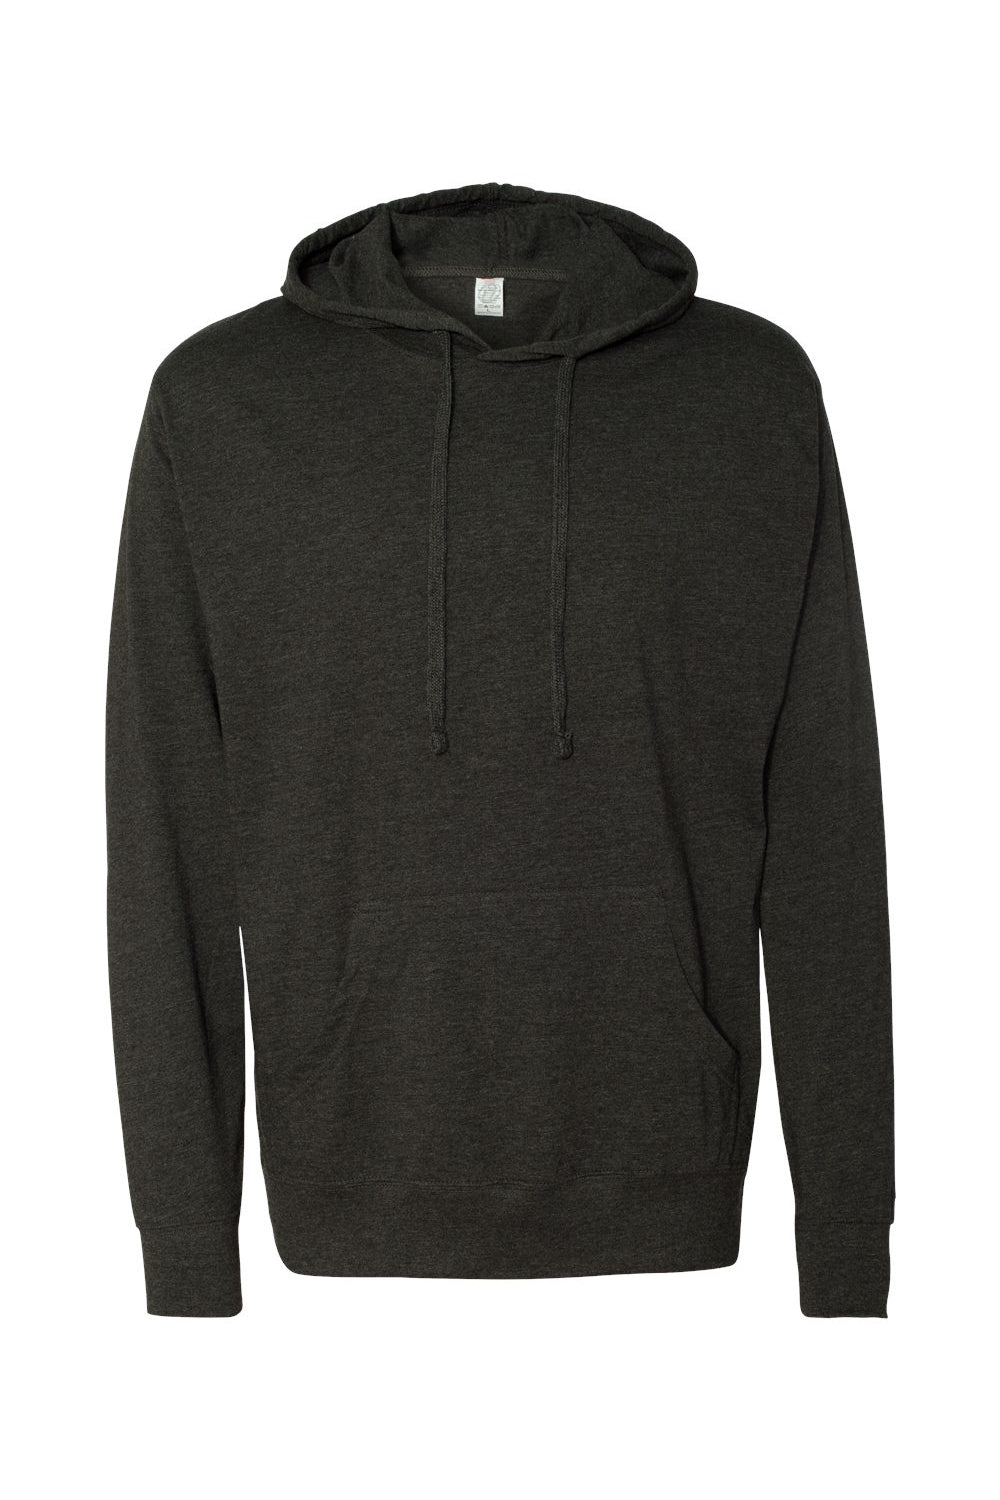 Independent Trading Co. SS150J Mens Long Sleeve Hooded T-Shirt Hoodie Heather Charcoal Grey Flat Front